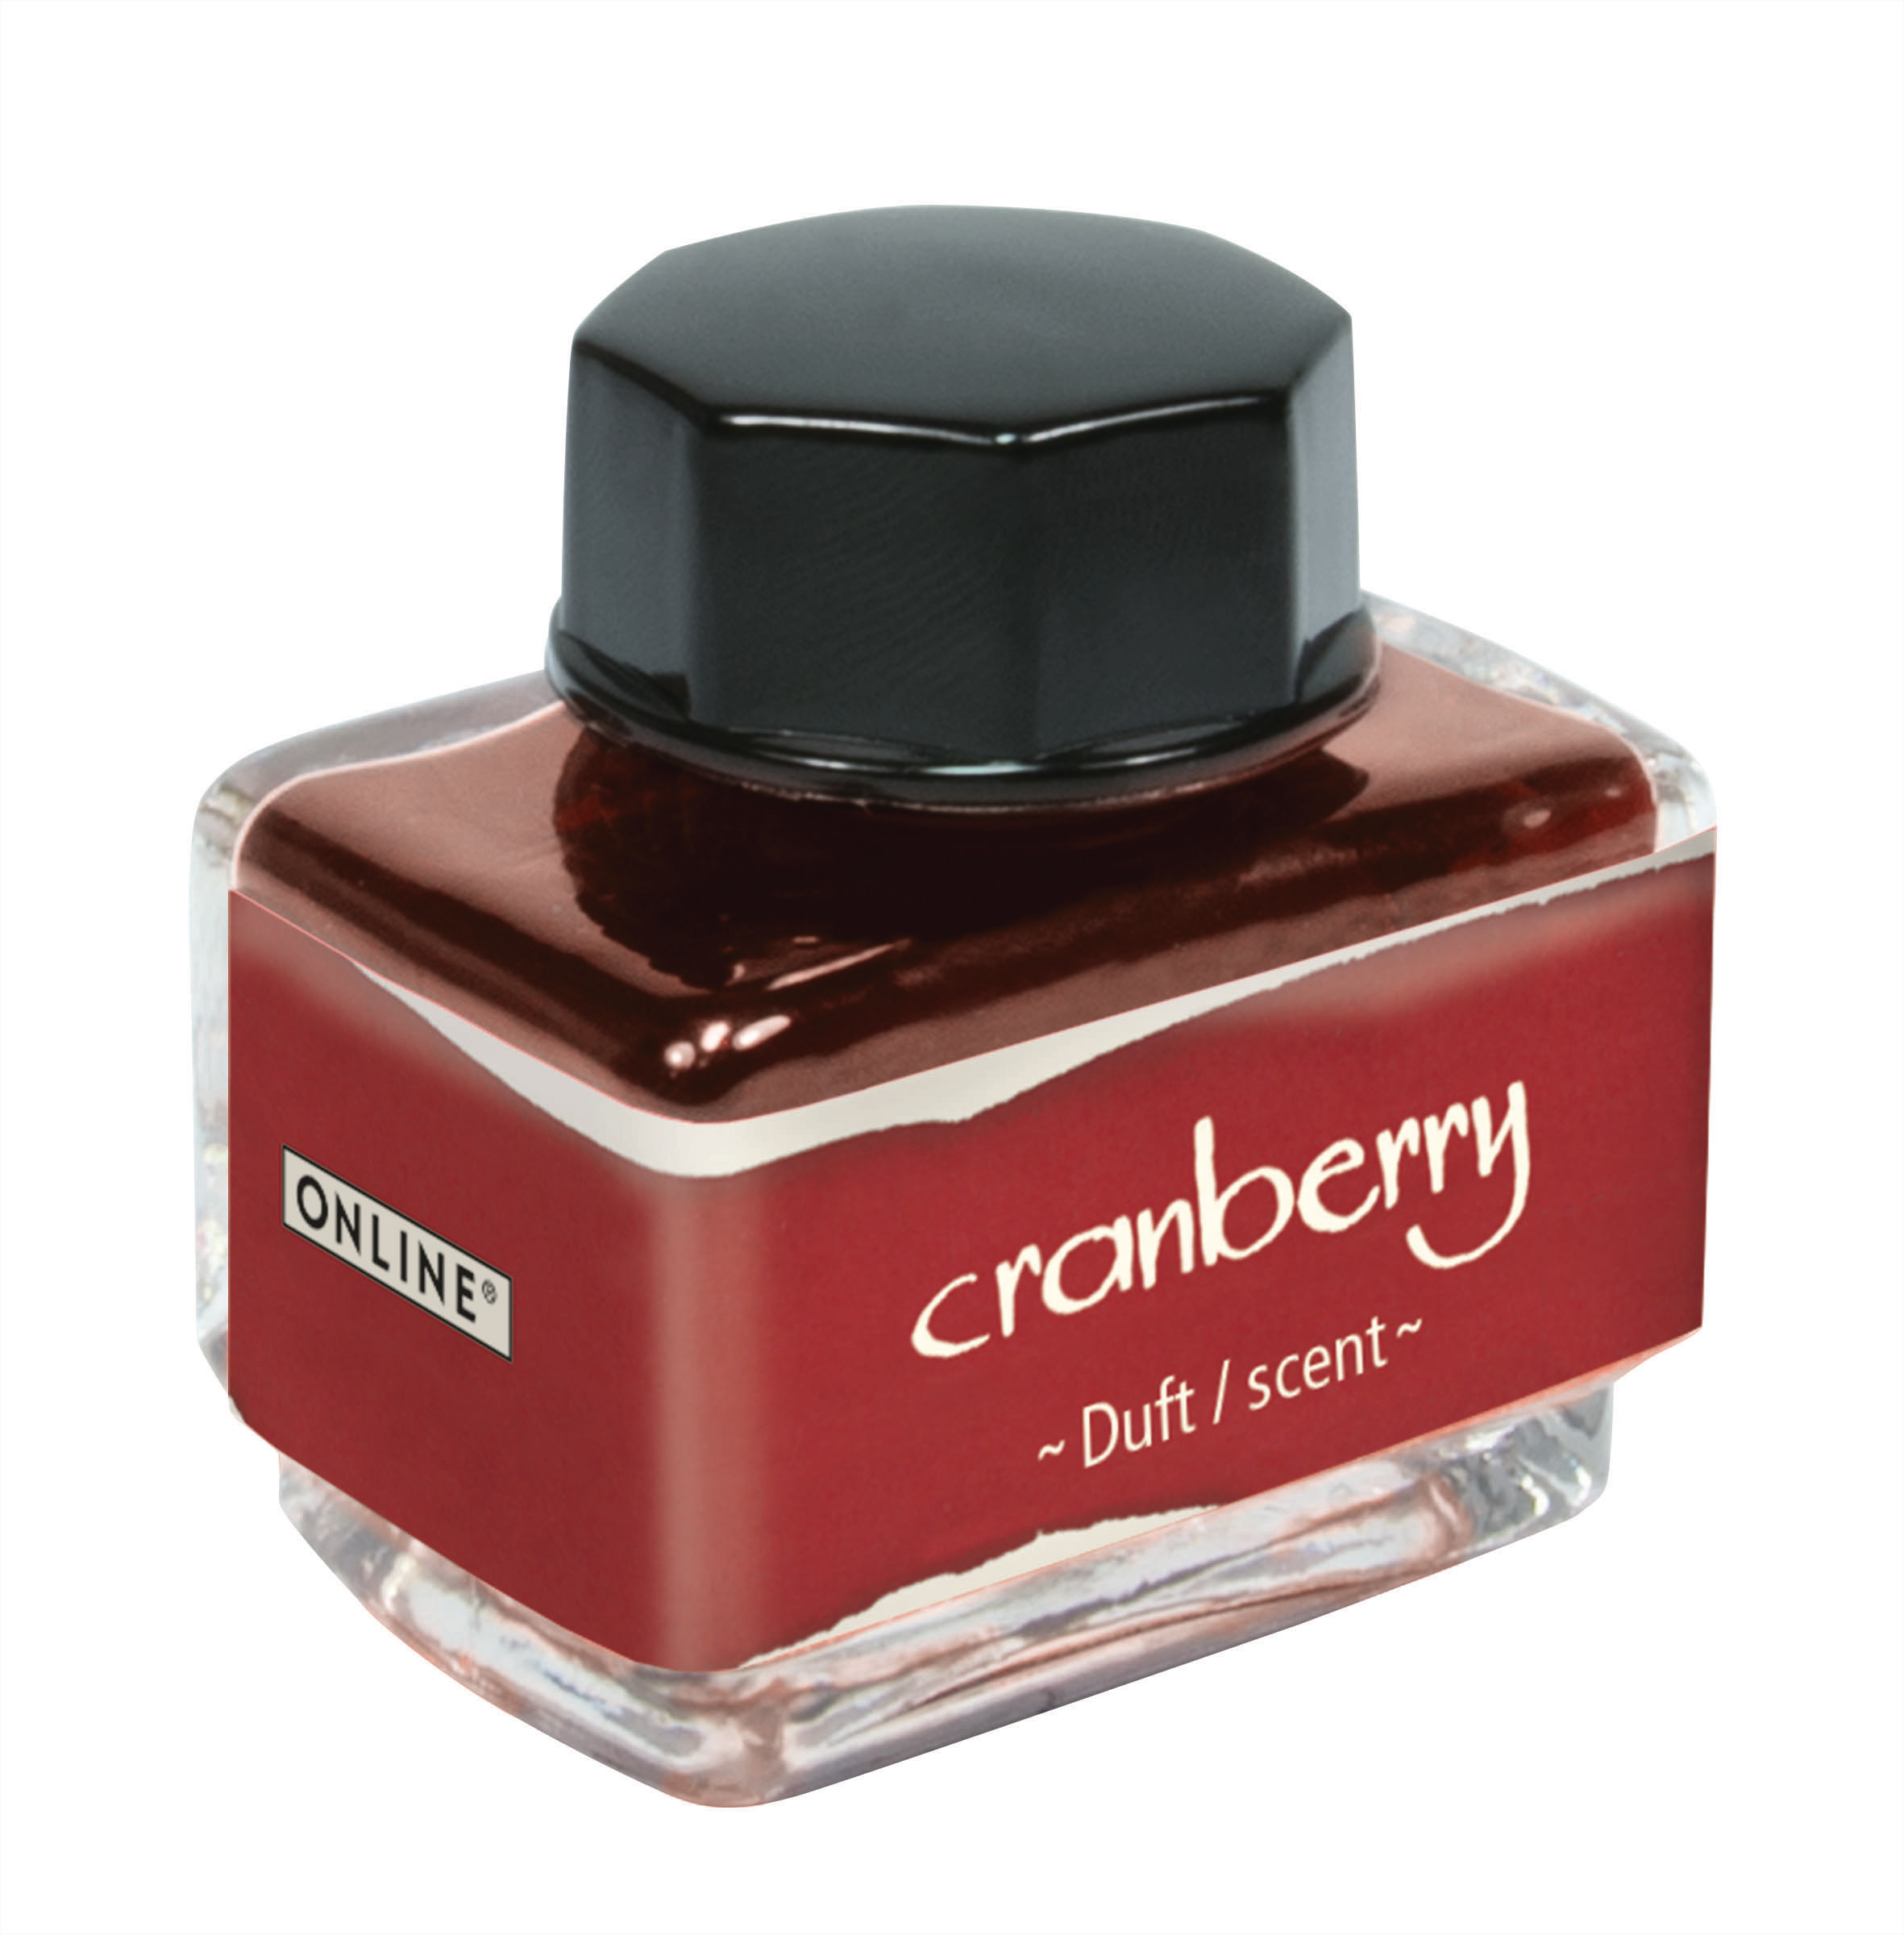 ONLINE Encre 15ml 17066/3 Dufttinte Cranberry - Red